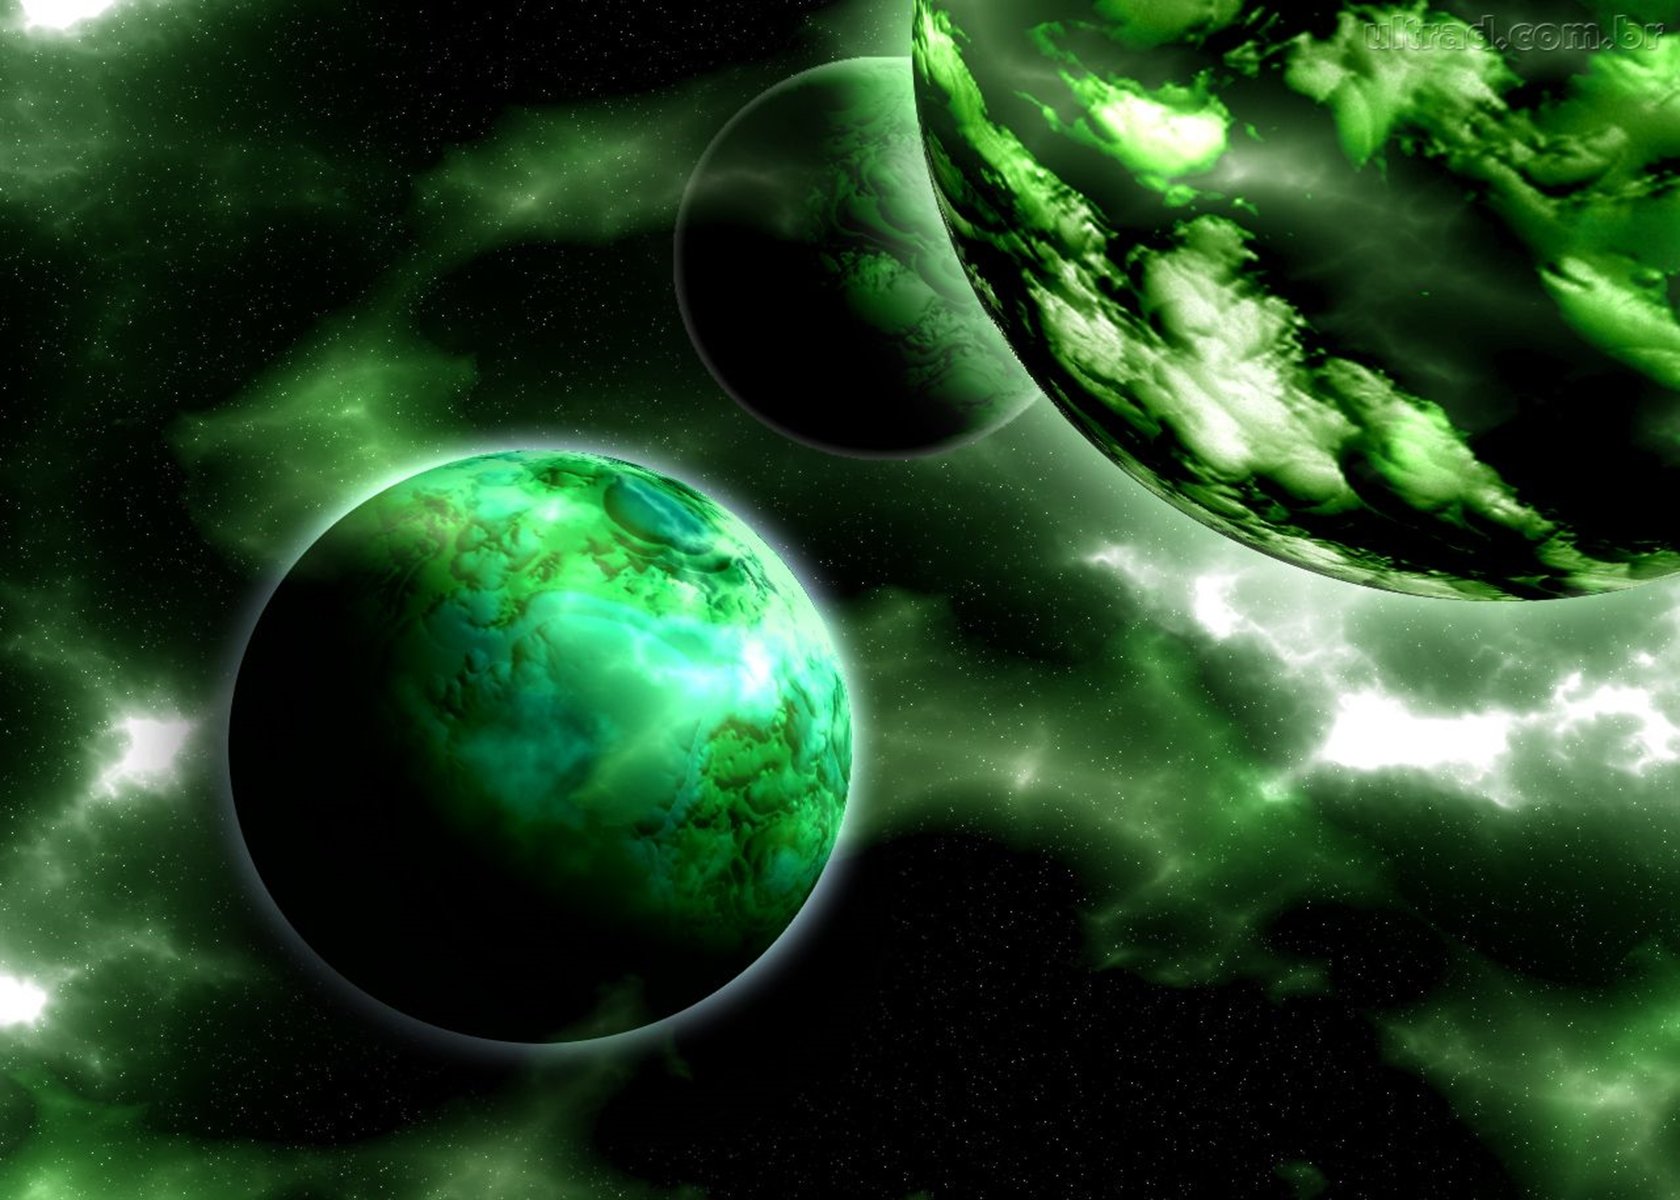 green space wallpaper,nature,green,outer space,planet,atmosphere